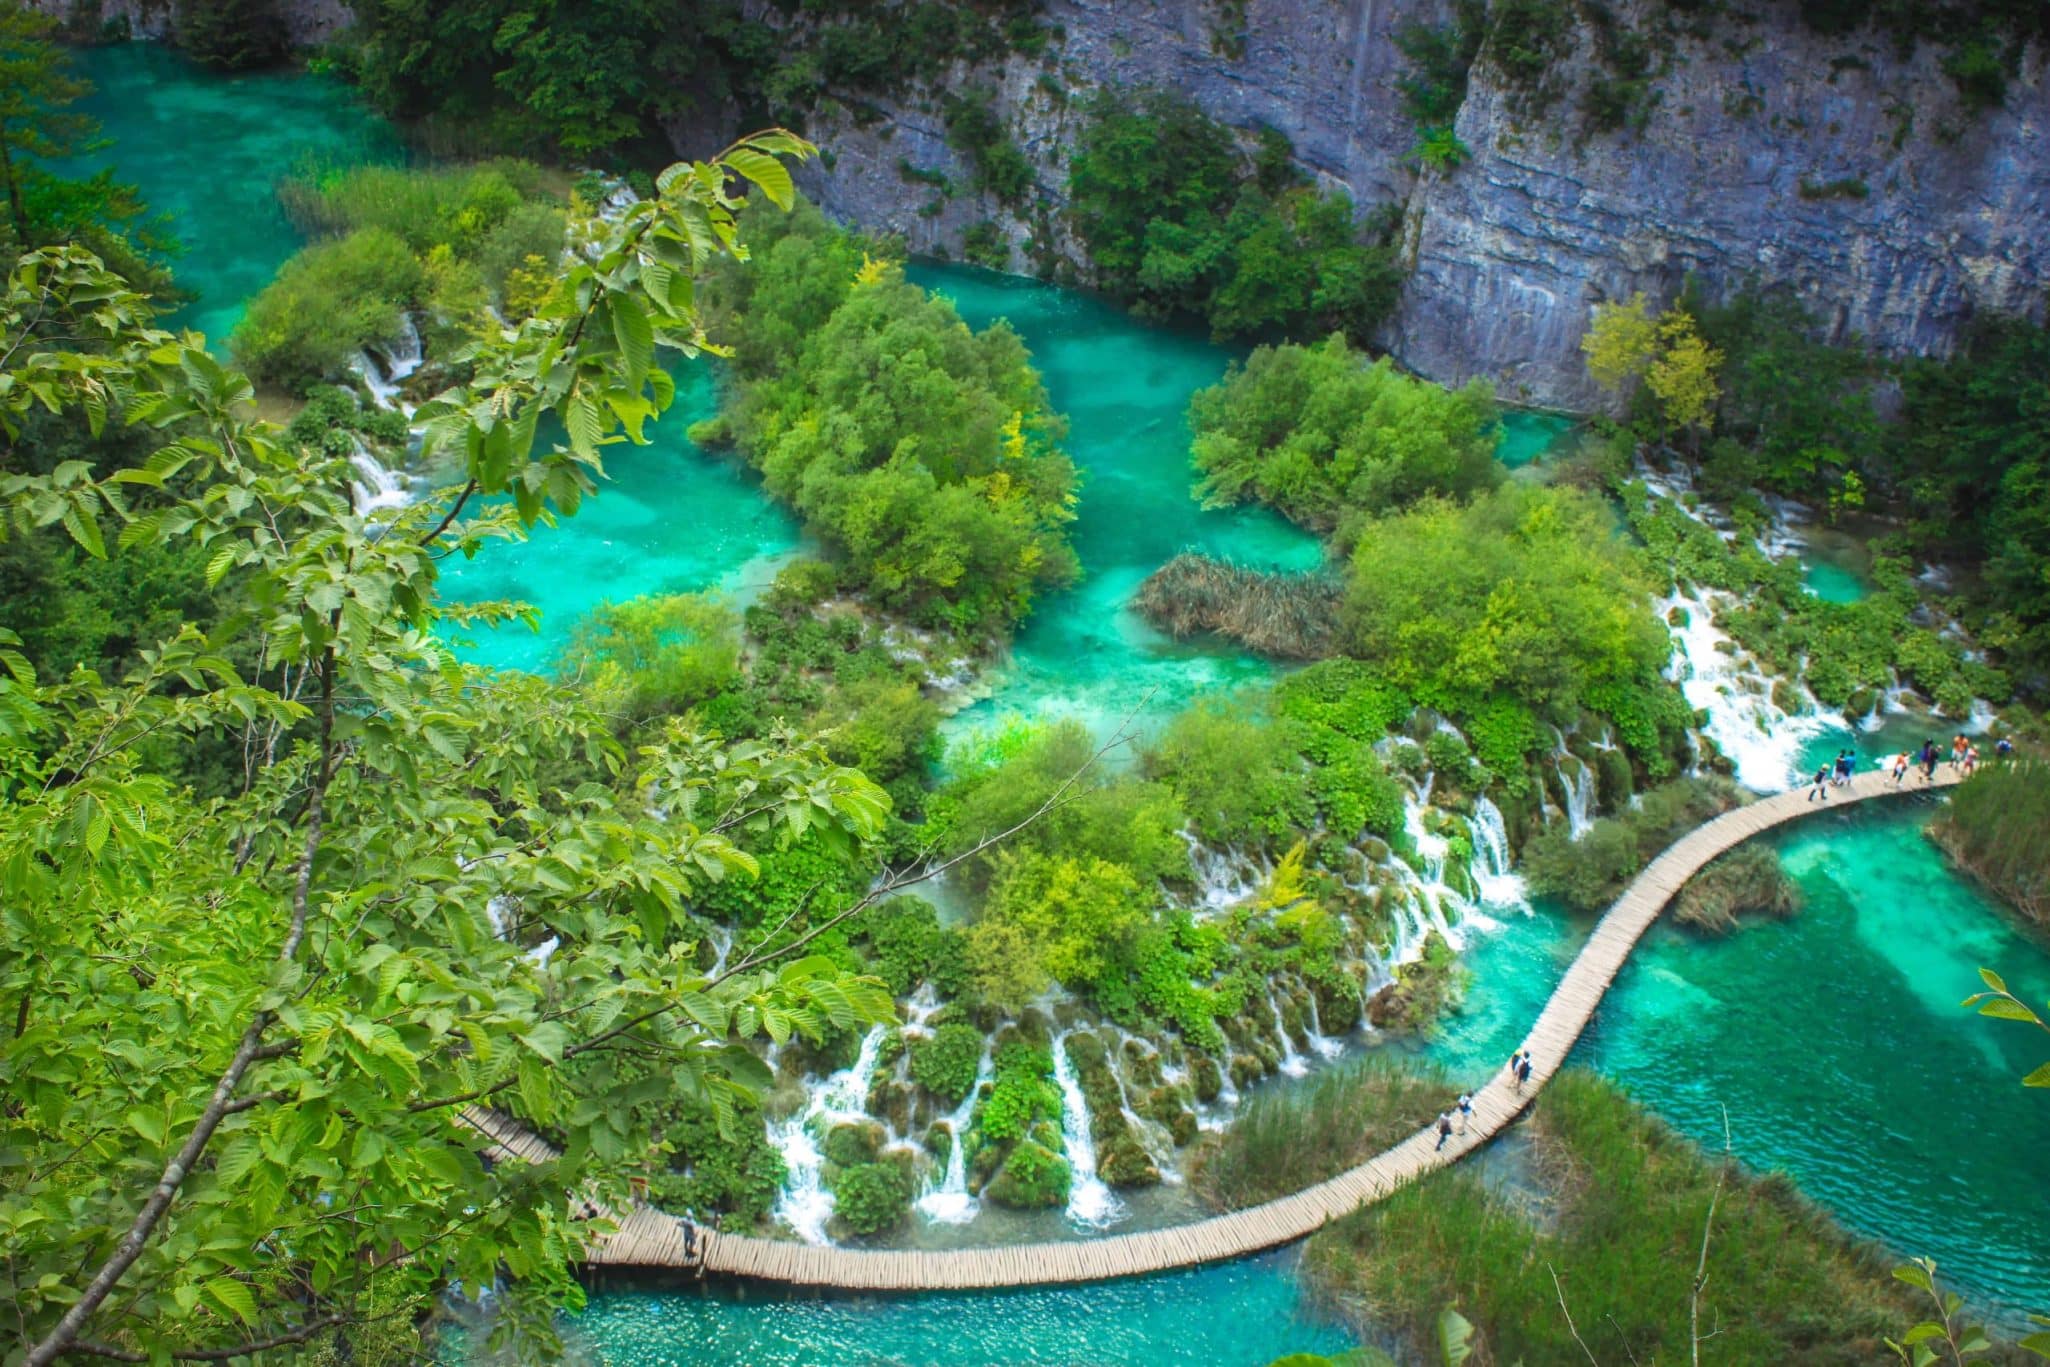 How to visit the magical Plitvice Lakes in one day